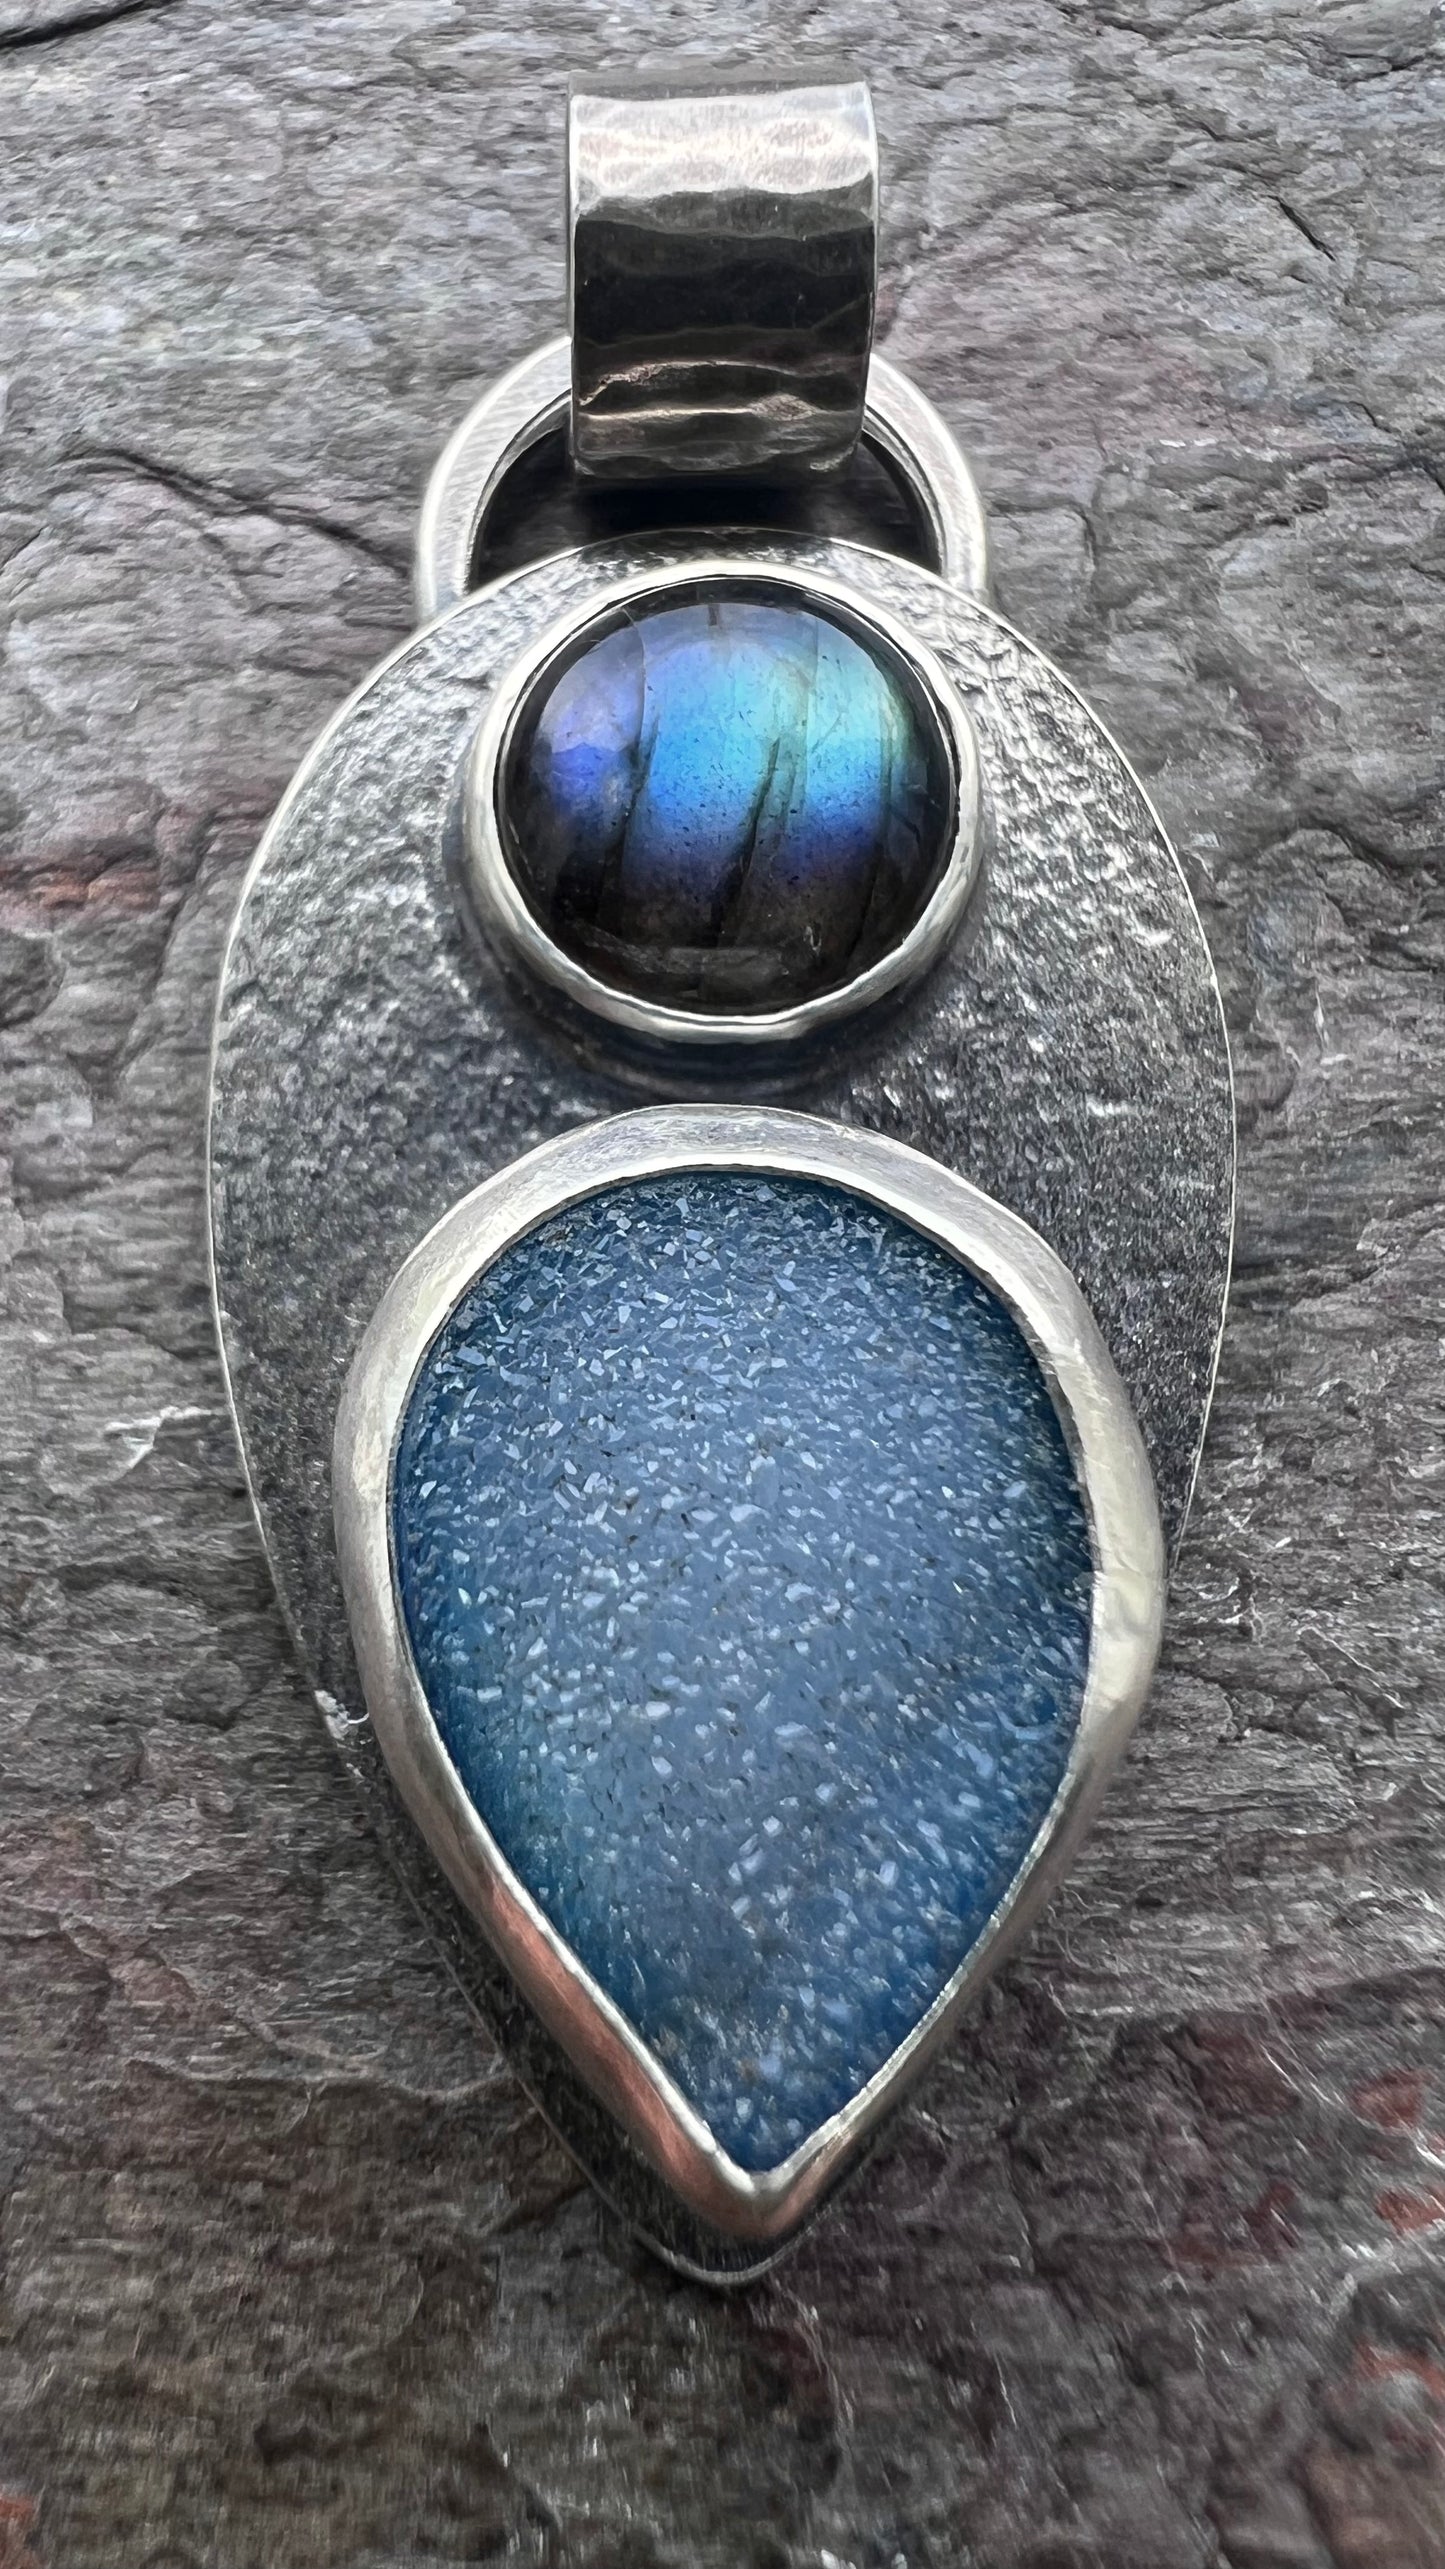 Labradorite and Agate Druzy Sterling Silver Pendant - One-of-a-Kind Handmade Pendant